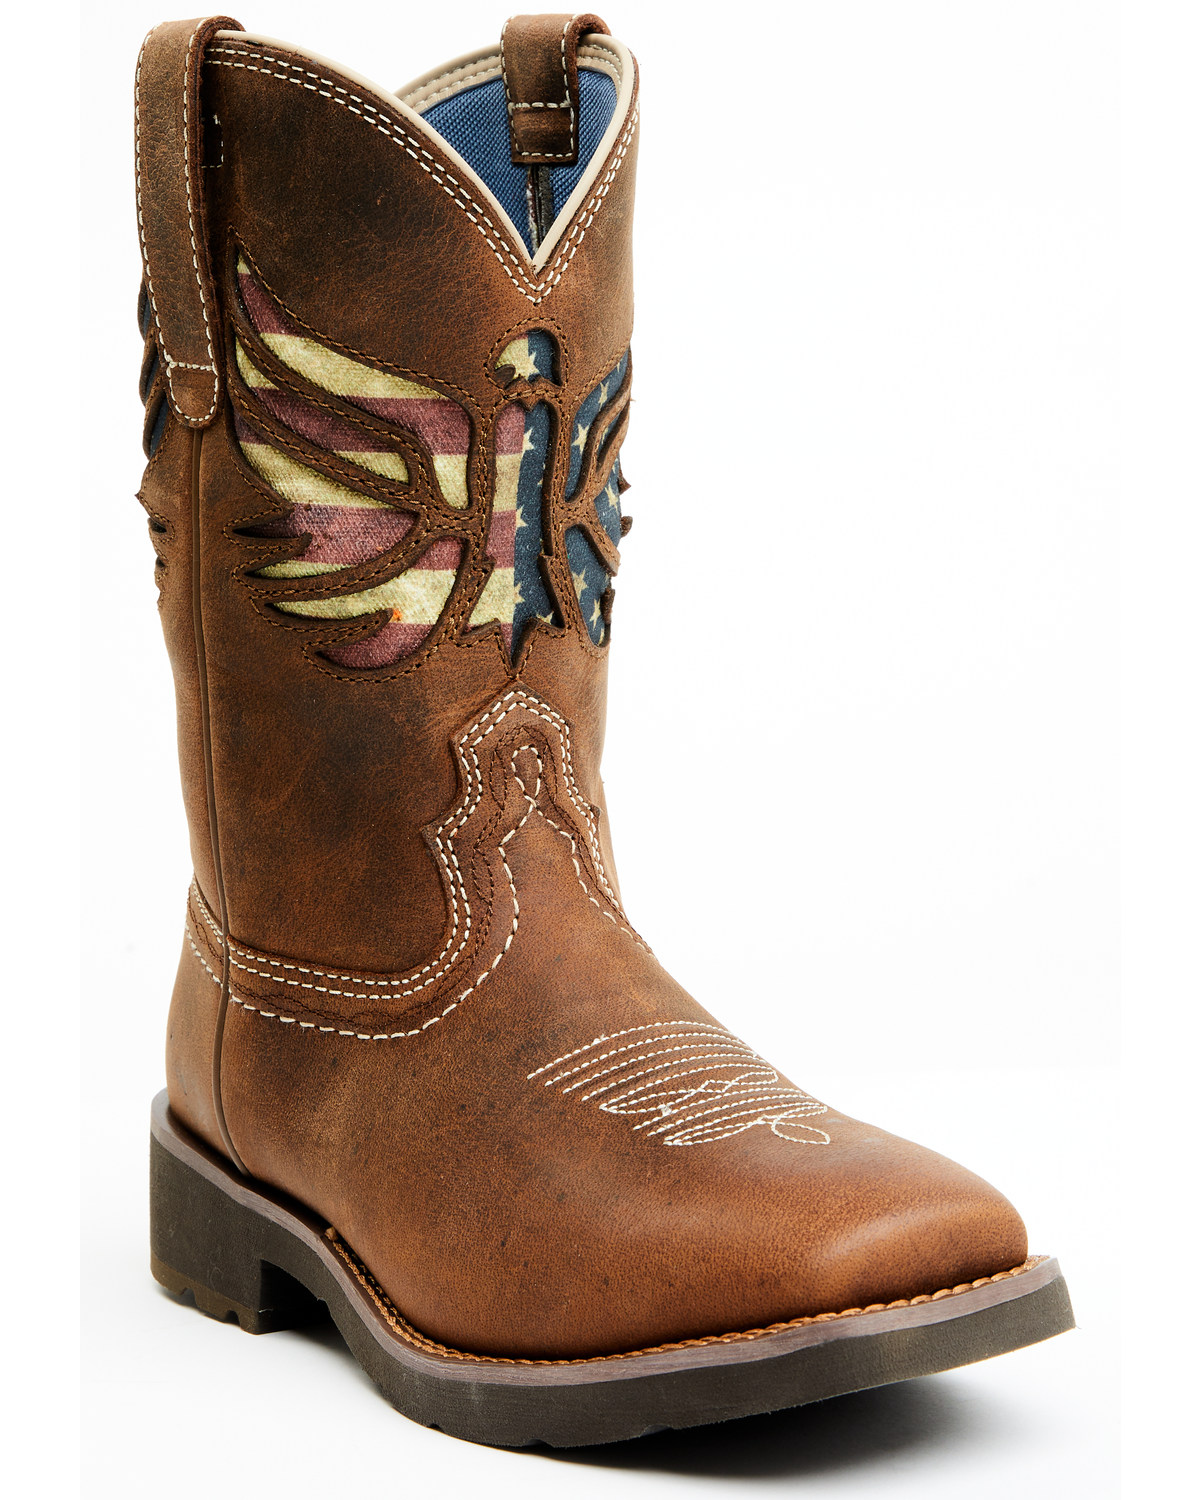 RANK 45® Women's Inspired Stars and Stripes Inlay Shaft Performance Leather Western Boots - Broad Square Toe